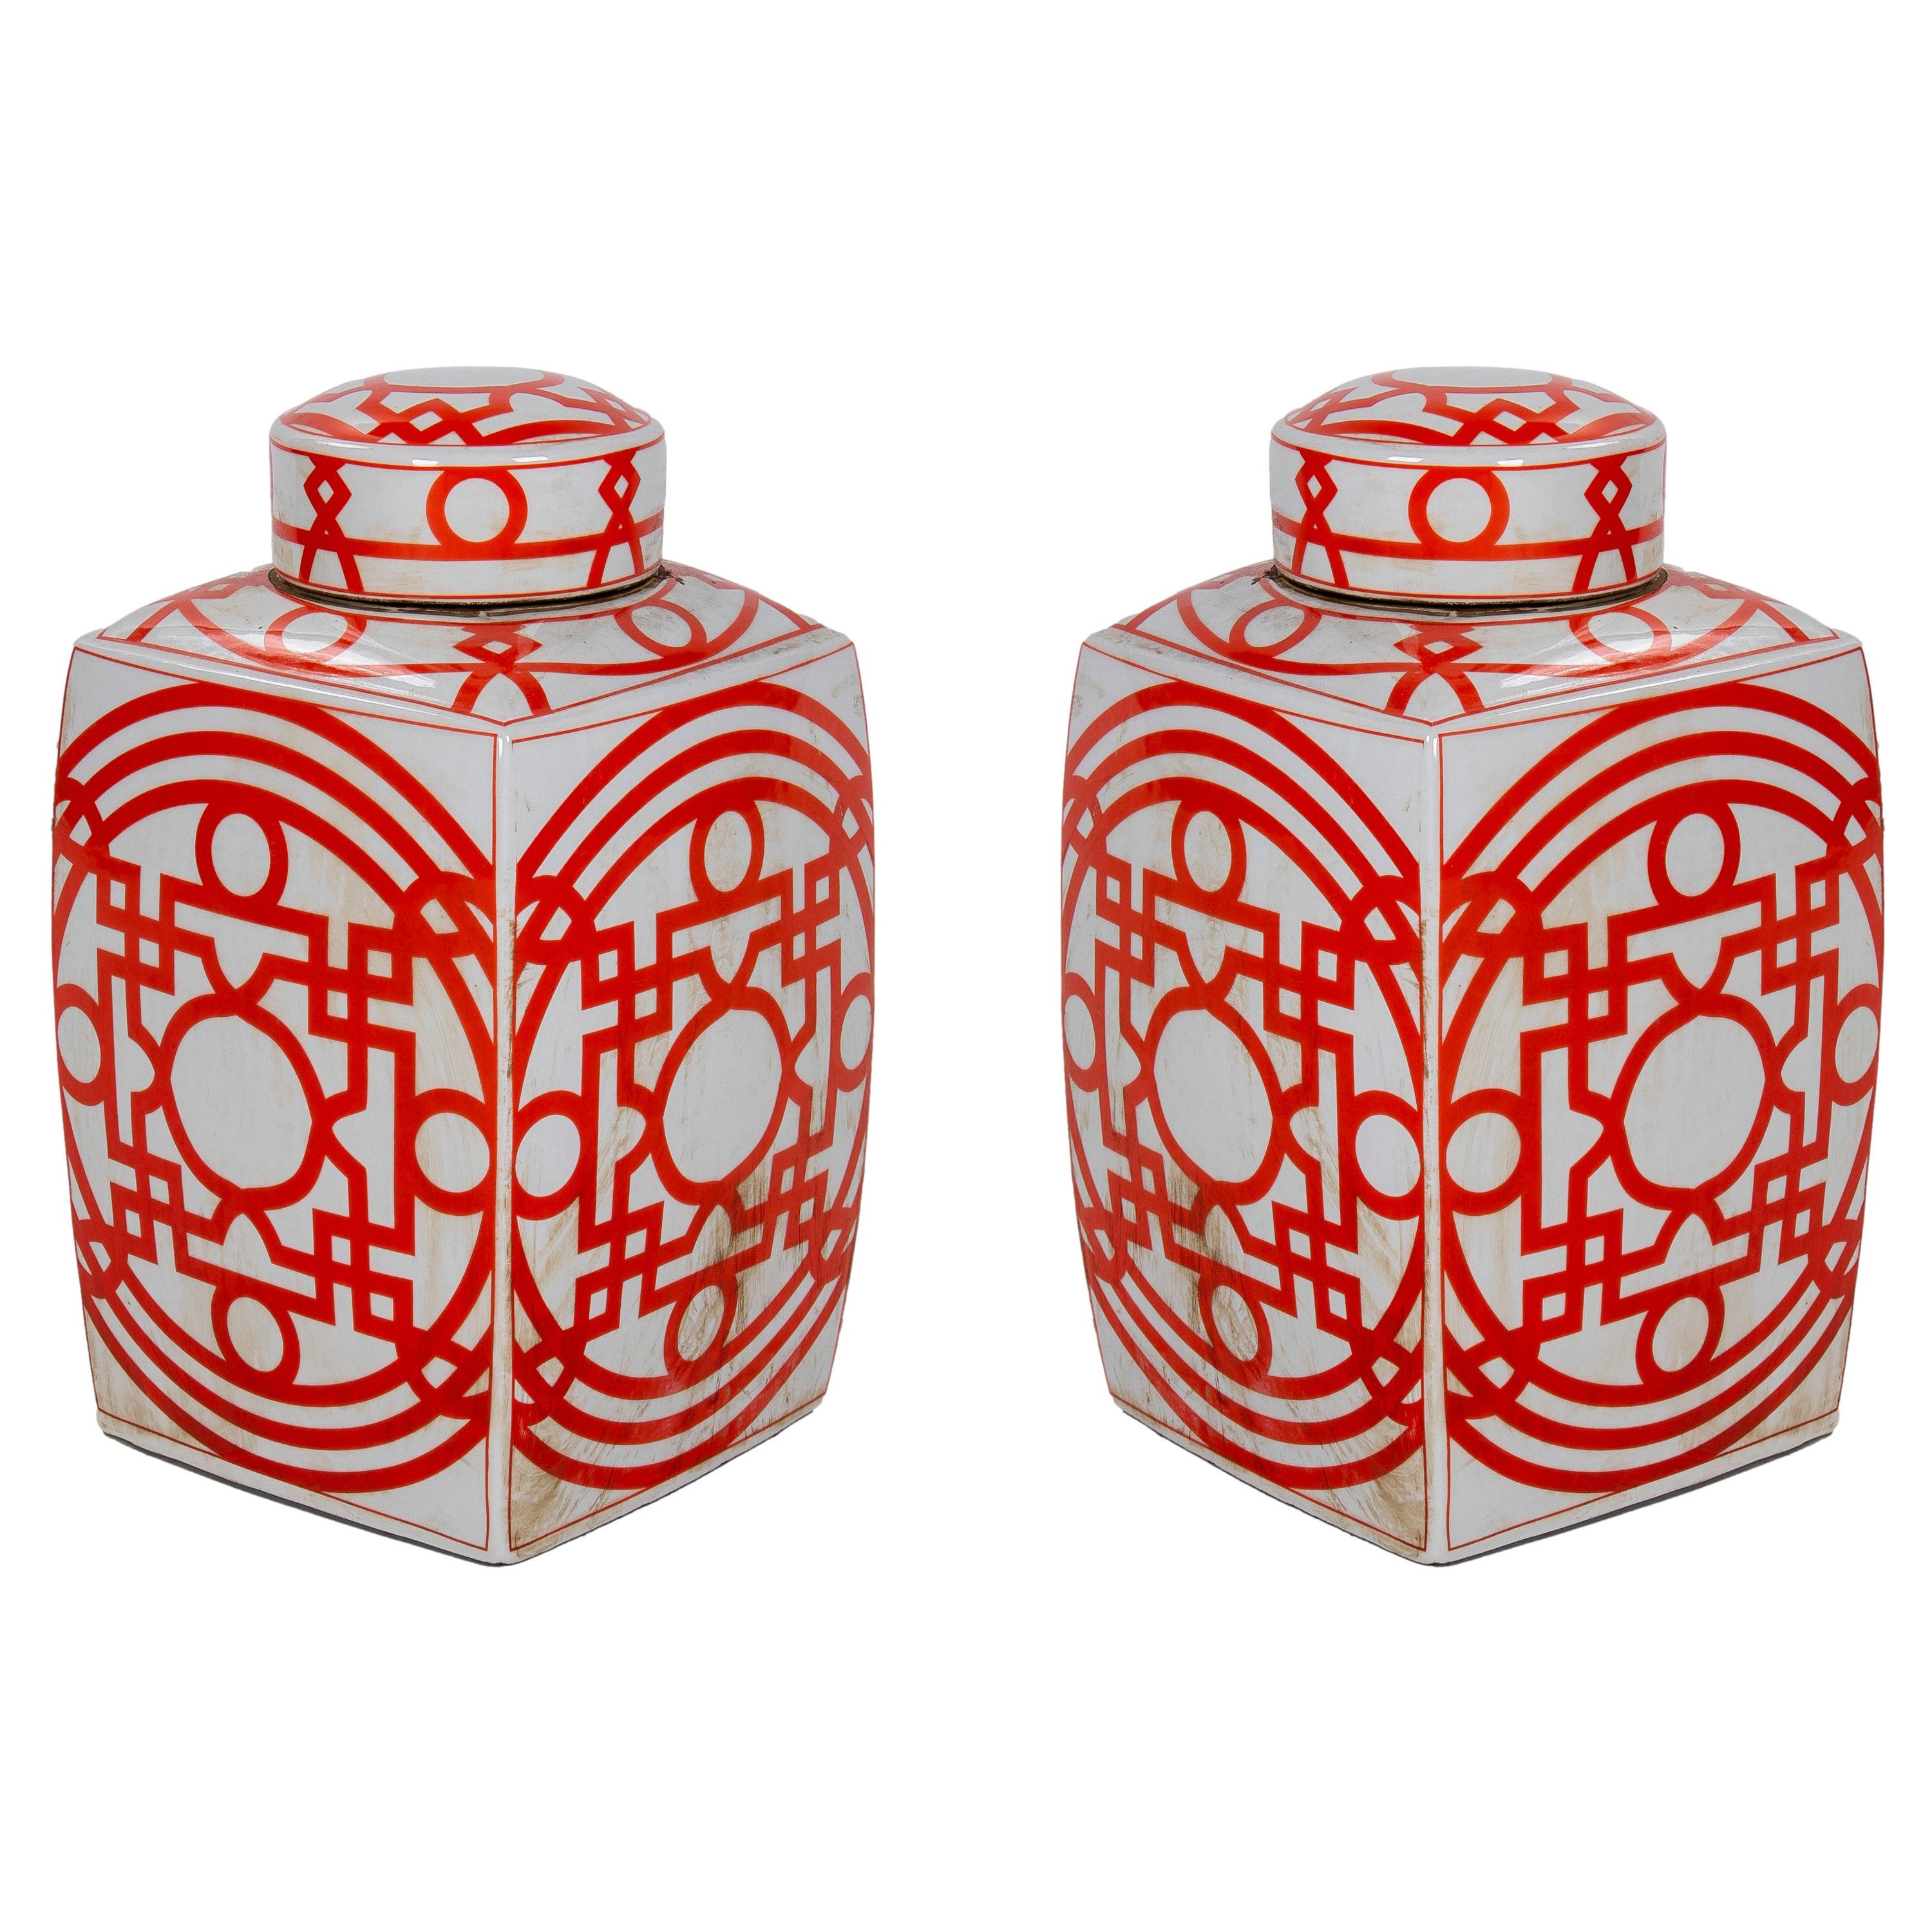 Pair of Asian White Glazed Porcelain Urns w/ Red Geometric Decorations & Lids For Sale